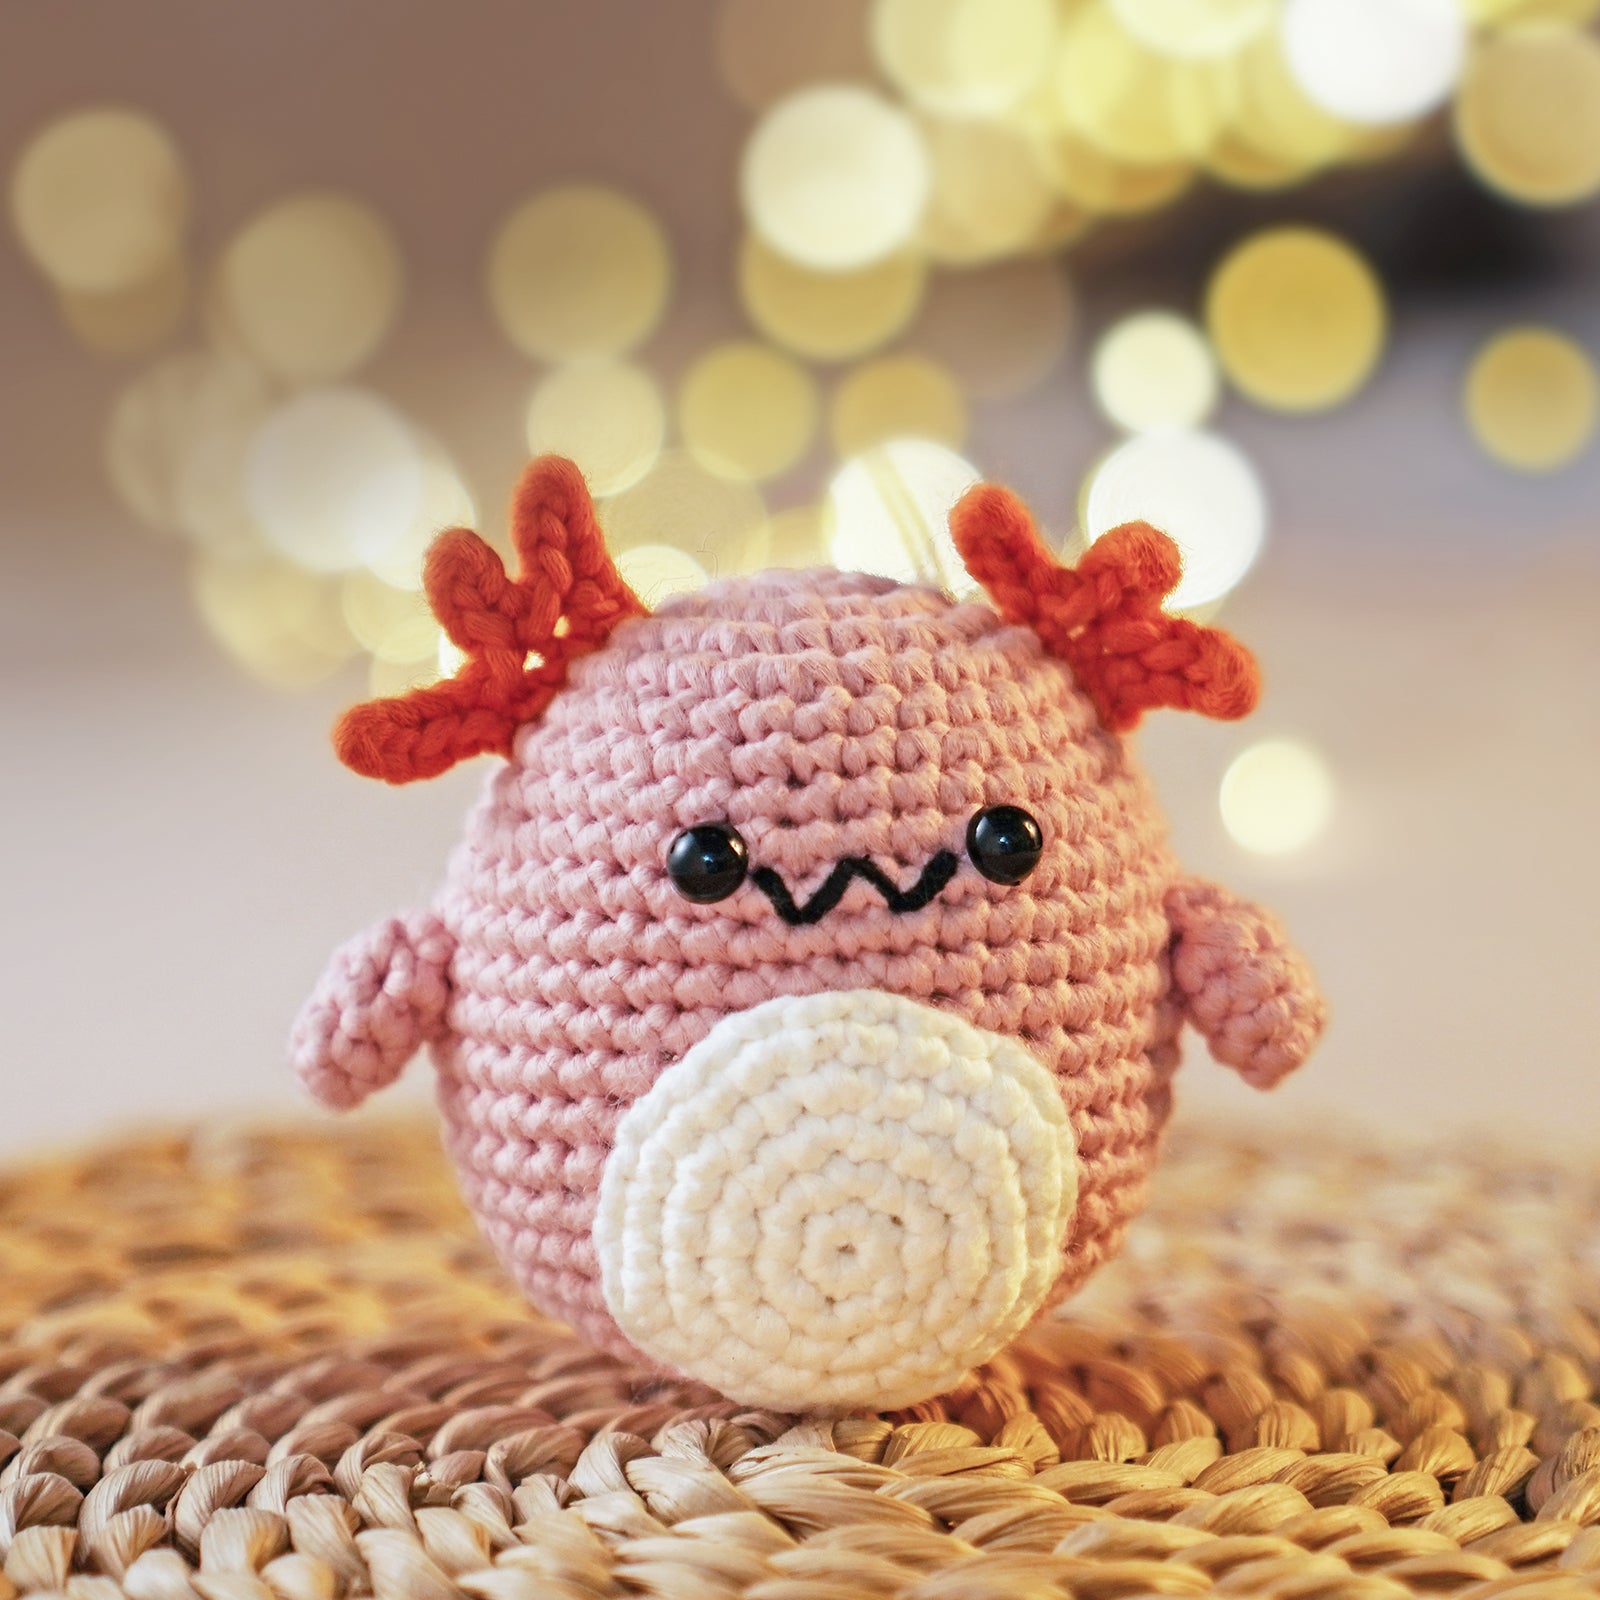 Buy Complete Crochet Kit for Beginners: All You Need in, Create Your First  Amigurumi, Include Hook, Soft Yarn, and Accessories, Starter DIY Crafts and  Gifts, Cute Axolotl Design for Adults, Teens. Online